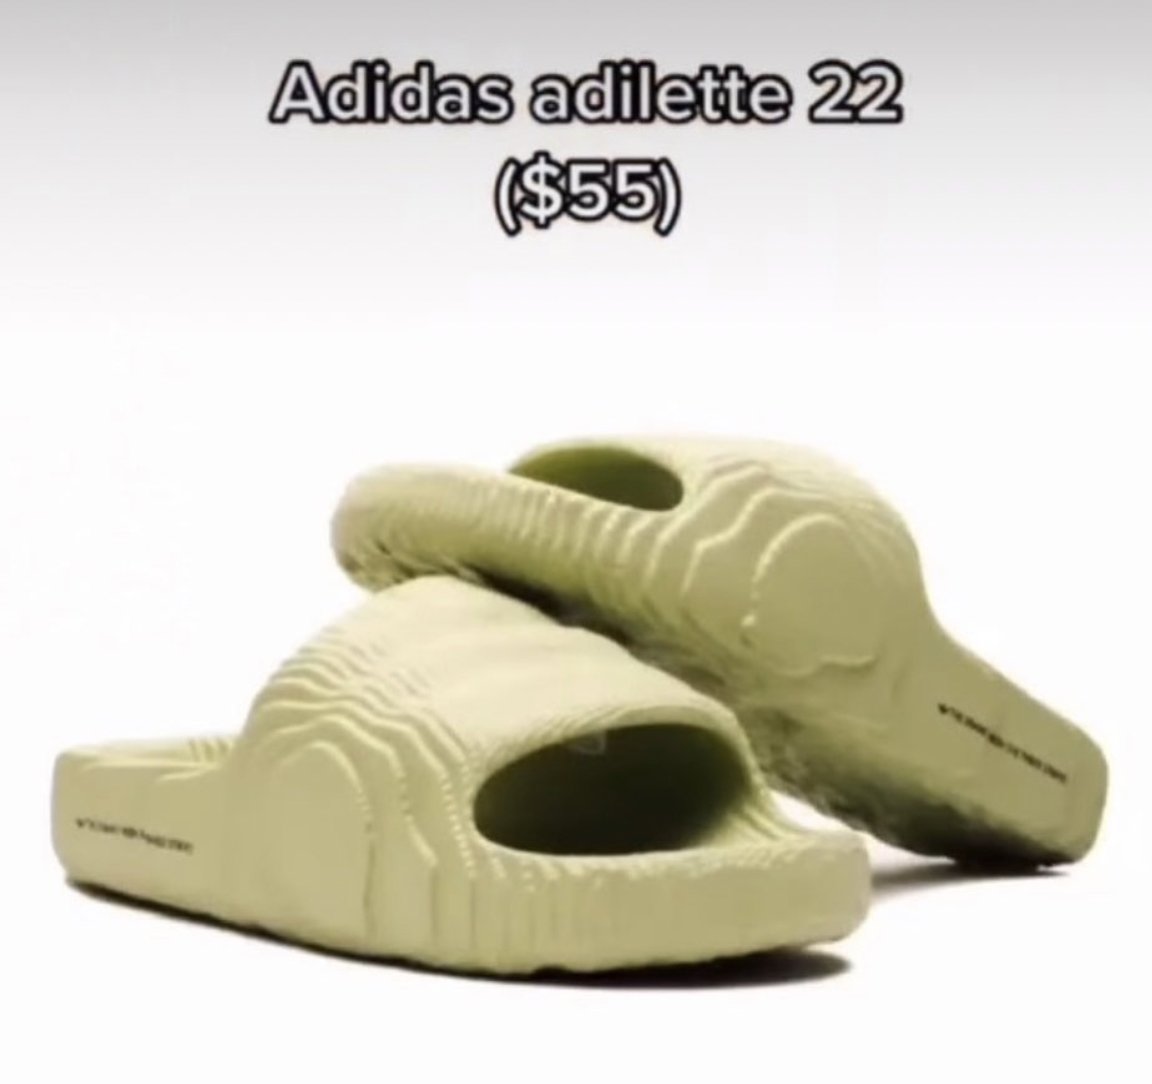 brendandunne on Twitter: ""This shoe is a fake Yeezy made by Adidas  themselves." Kanye West ripping Adidas and calling out CEO Kasper Rørsted  over the new Adilette slides. https://t.co/zYc17K4z0b" / Twitter